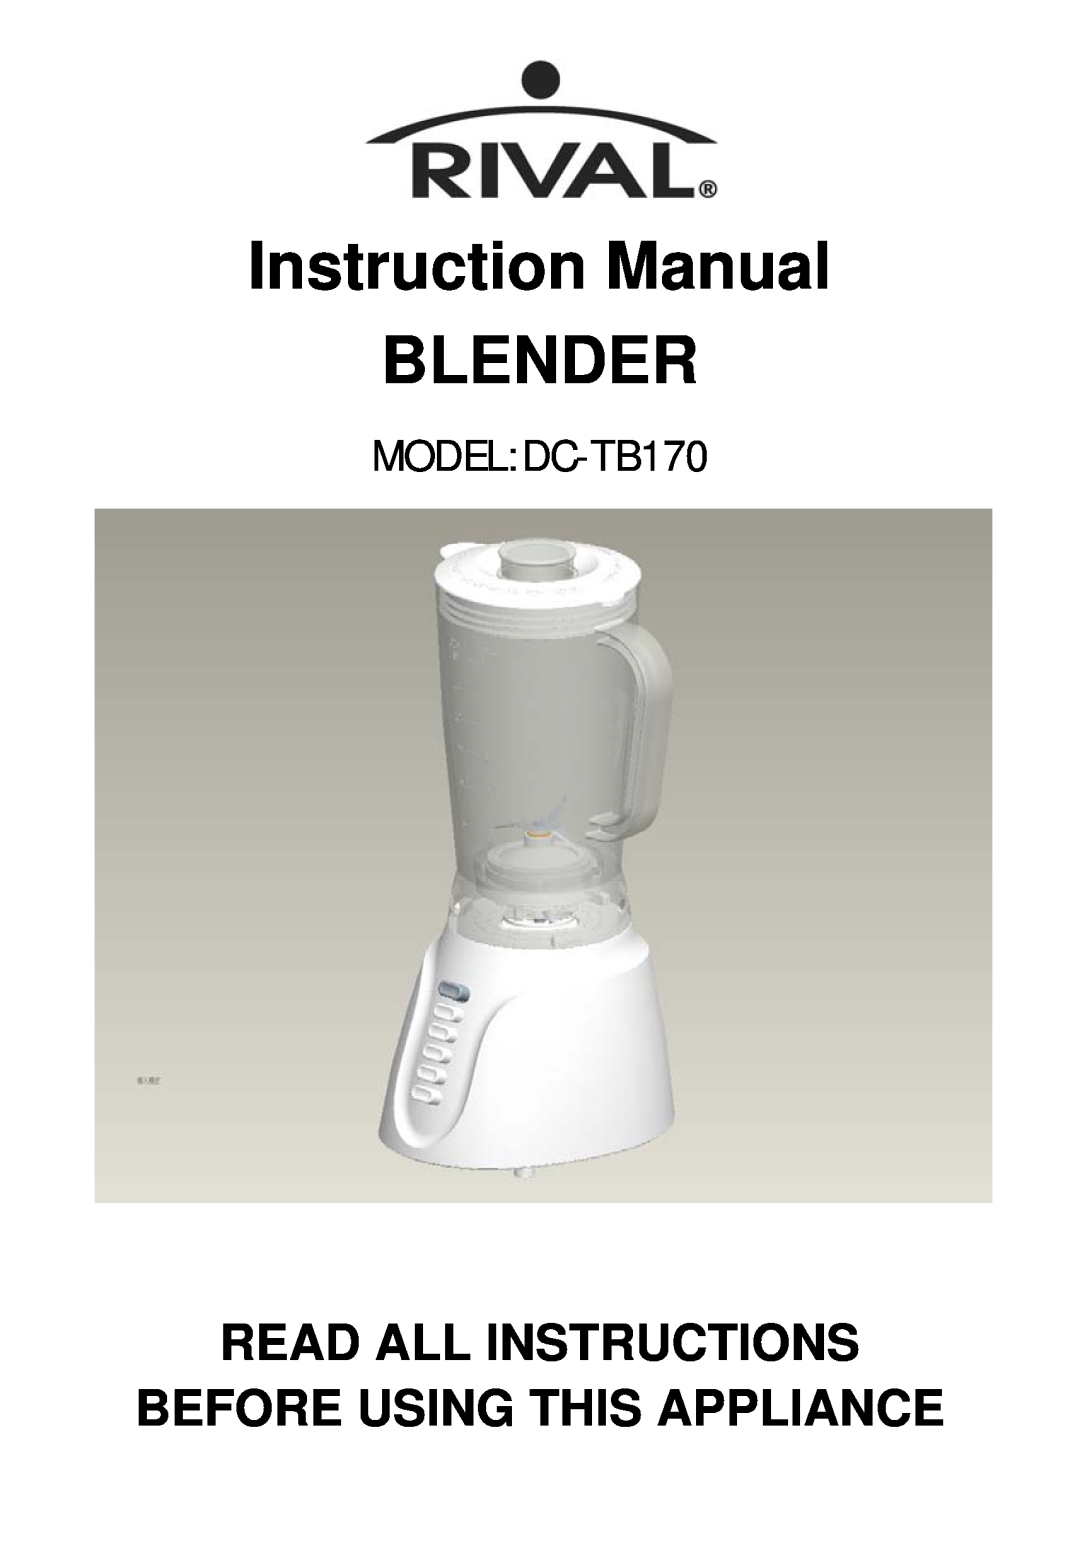 Rival instruction manual Read All Instructions Before Using This Appliance, MODEL DC-TB170 